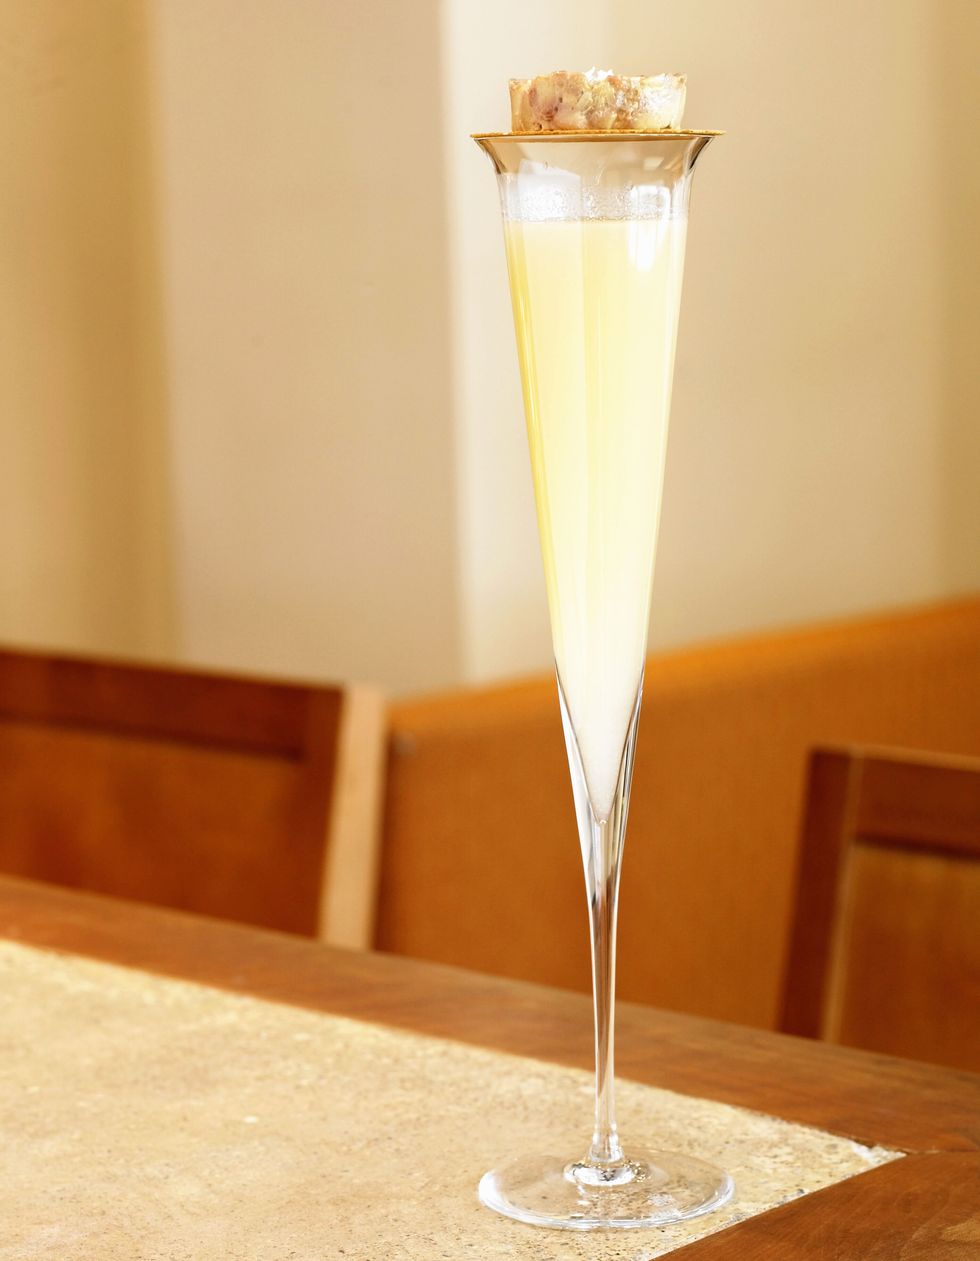 <p><a href="http://dishingupthedirt.com/featured/pear-ginger-sage-champagne-cocktails/" target="_blank">If you fancy</a>. <strong></strong></p><p><strong>Ingredients: </strong></p><p>1 cup Honey</p><p>3 cups Water</p><p>2 Whole Pears, peeled, cored, and diced</p><p>1 Large Chunk of Ginger, peeled and diced</p><p>20 Fresh Sage Leaves, plus additional for garnish</p><p>1 Bottle of Champagne or Sparkling Wine</p><p><strong>Directions: </strong></p><p><span></span>In a saucepan combine the honey and water over medium heat and bring to a light boil. Turn the heat down to low and simmer, stirring occasionally, until the honey has dissolved completely. Add the pears, ginger, and sage leaves. Simmer until the mixture has reduced by 1/3 for about 15-20 minutes, stirring occasionally. Remove from heat and let the mixture steep for an additional 10 minutes. Strain the syrup into a large mason jar. Discard the ginger and sage leaves. To assemble the drinks place a few pieces of the cooked pear into each glass followed by 1-2 tablespoons of the simple syrup. Add the champagne and enjoy.</p>